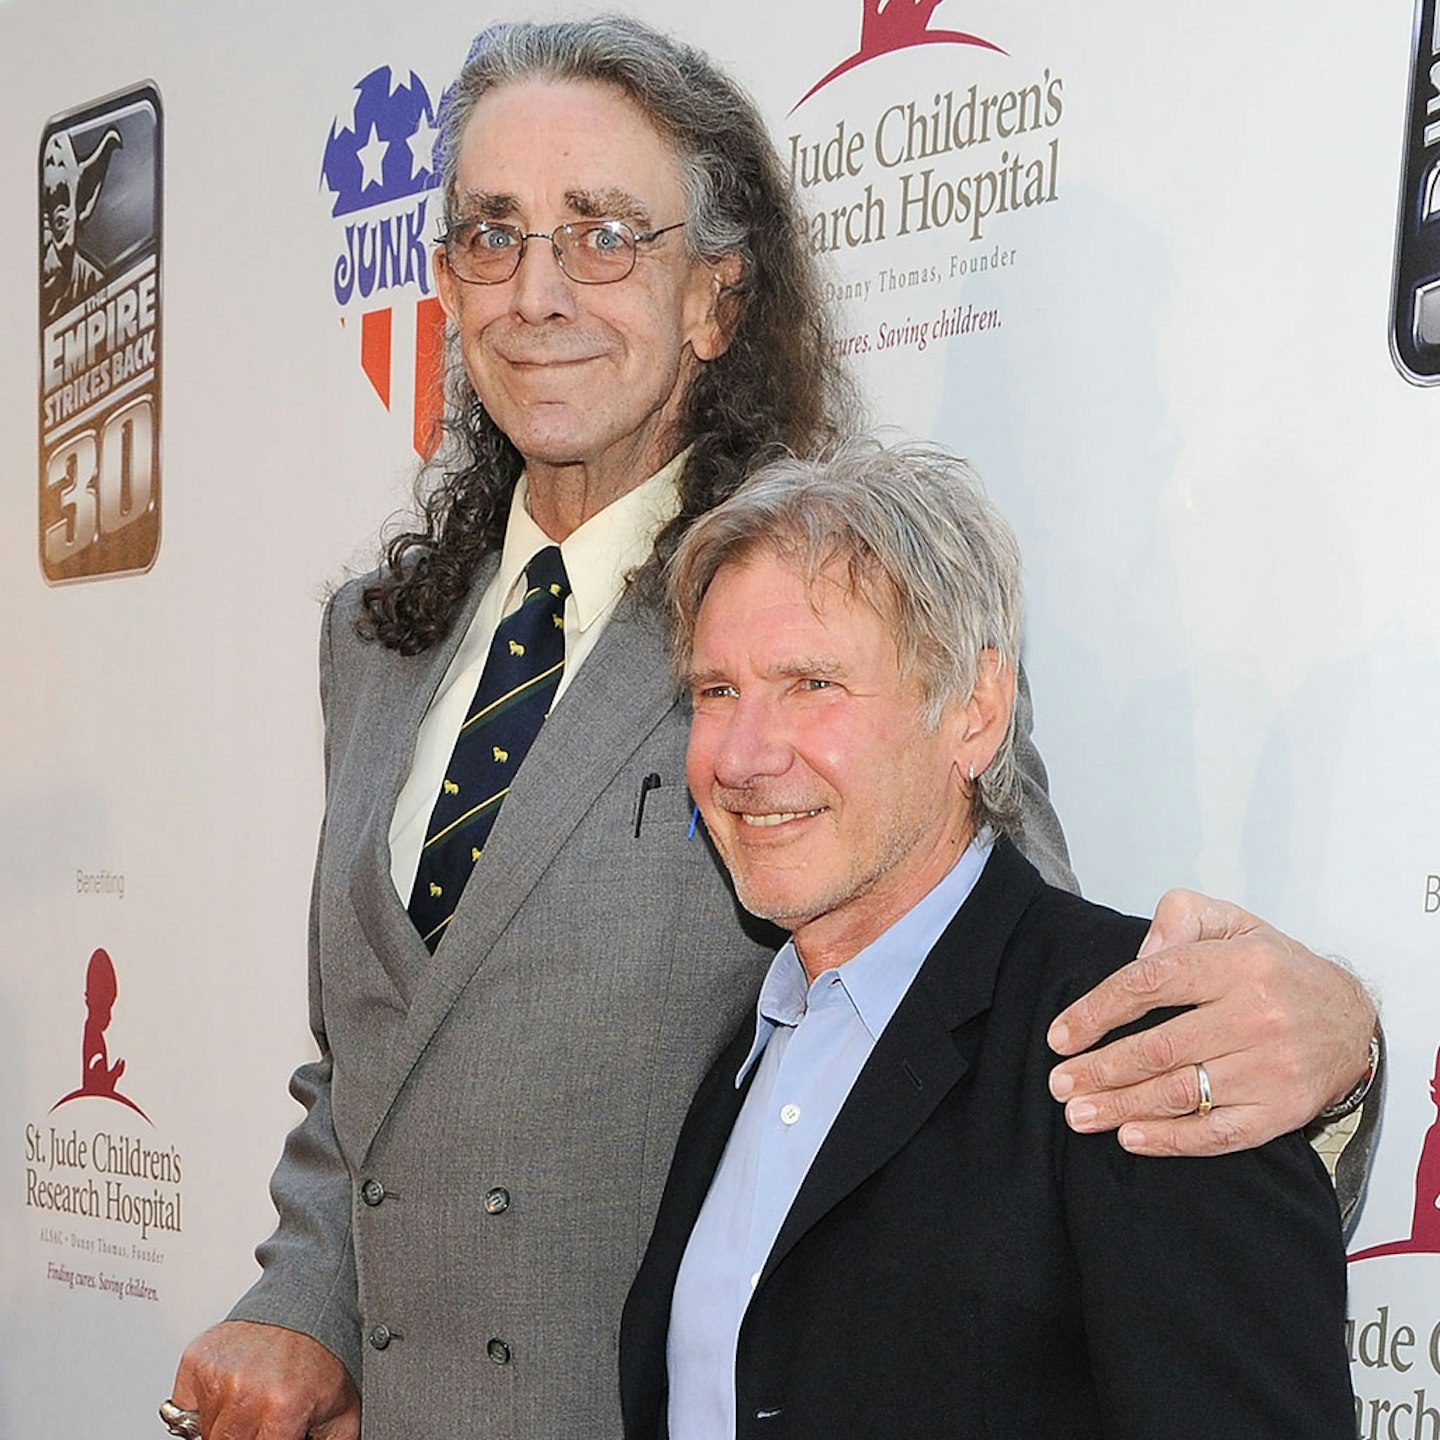 Peter and Harrison were close friends in real life too, pictured here in 2010